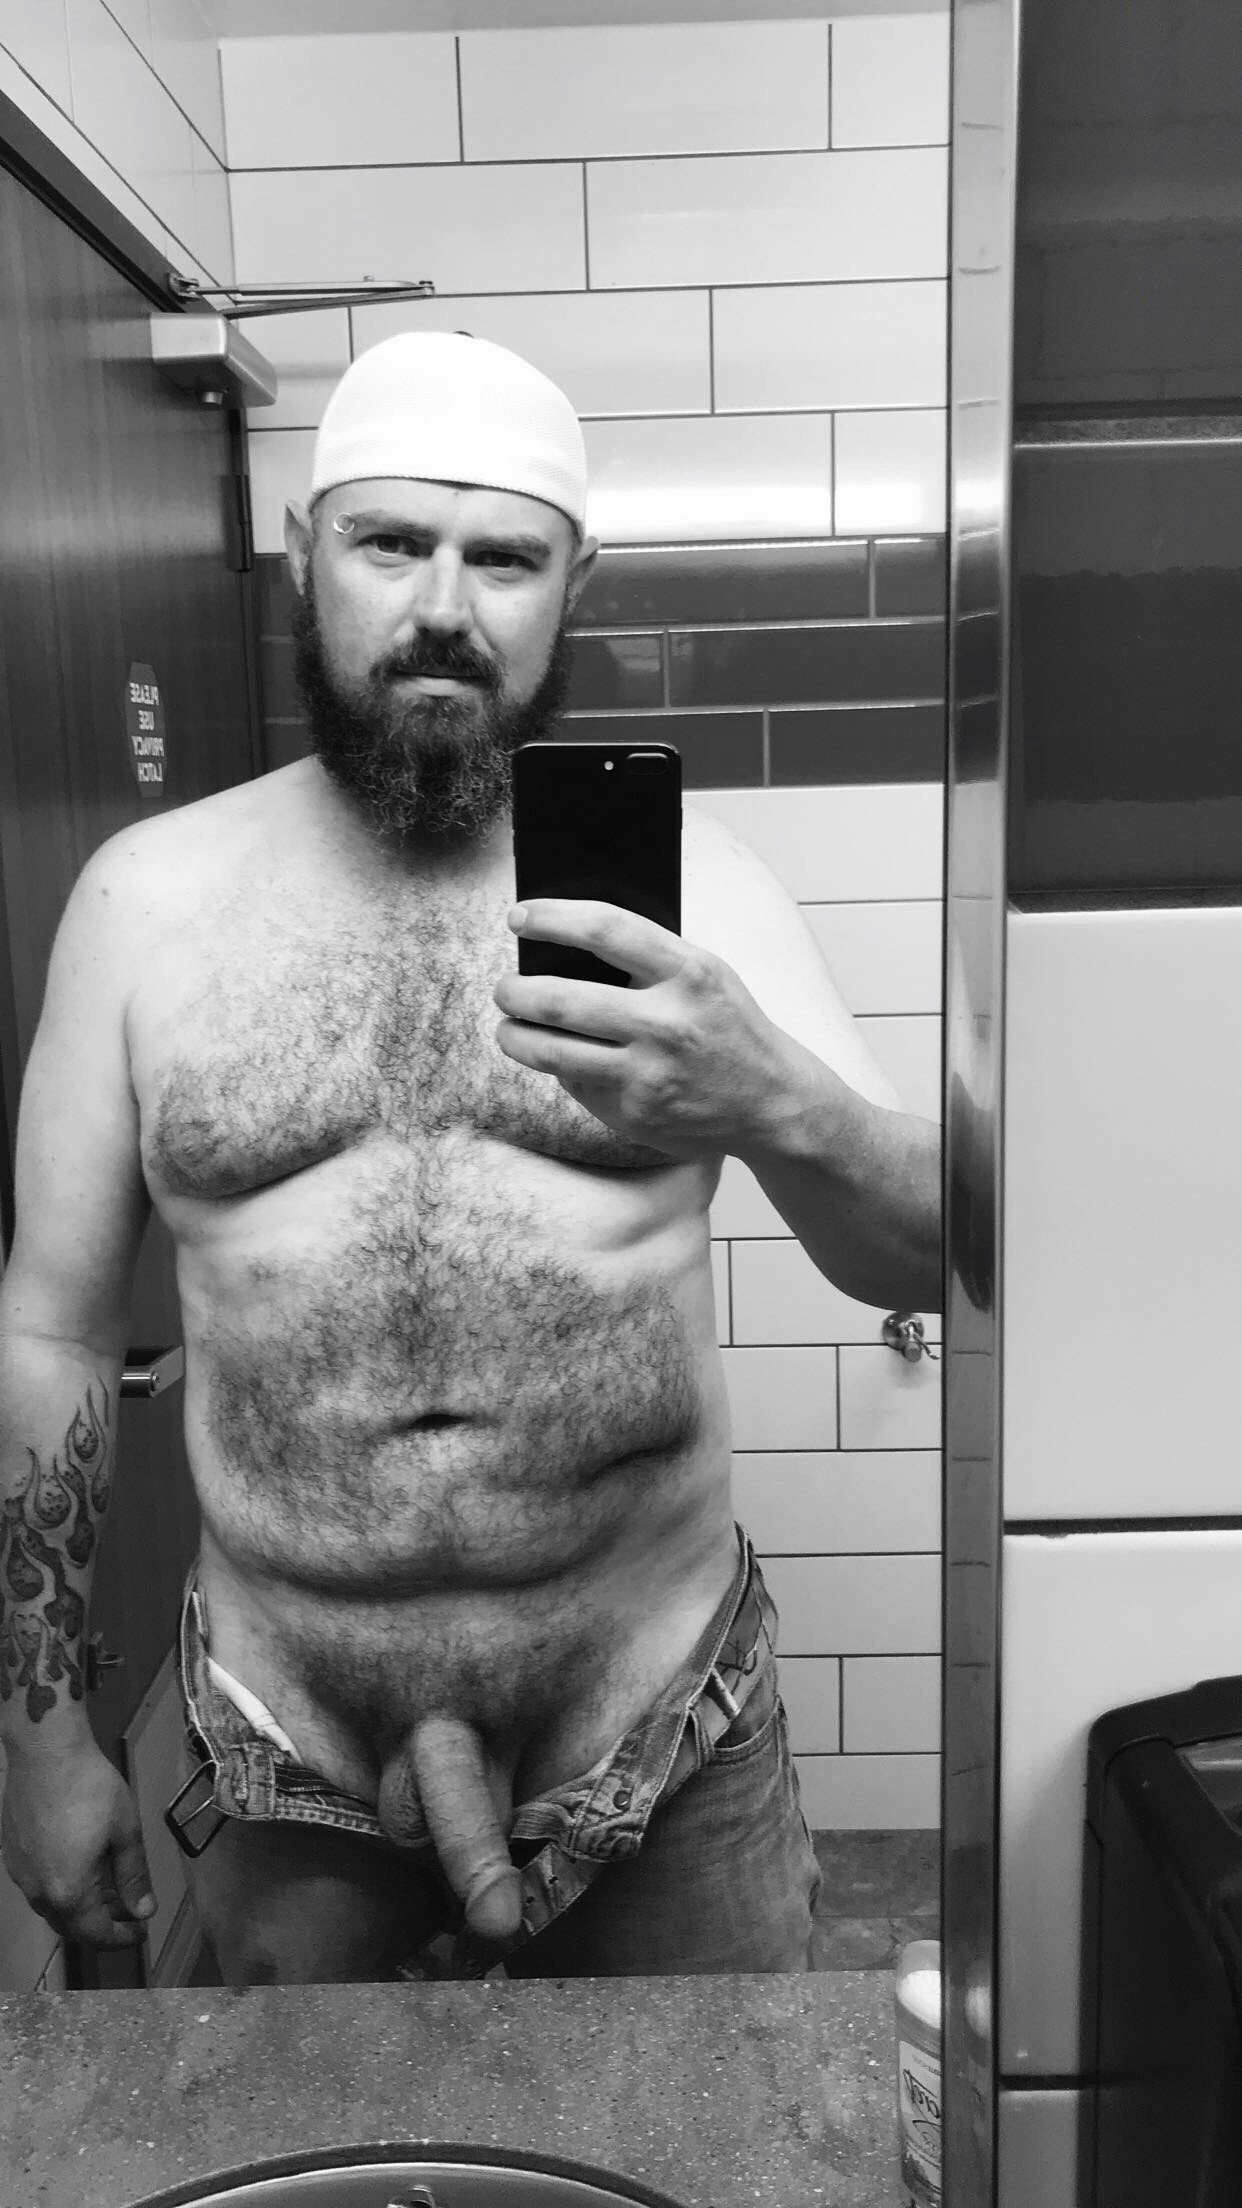 Photo by DaddyandBabygirl with the username @DaddyandBabygirl, who is a verified user,  May 4, 2019 at 12:43 AM. The post is about the topic Show your DICK and the text says 'She likes shower pics from the road. #trucker #selfie #showerselfie #cock #tattoo'